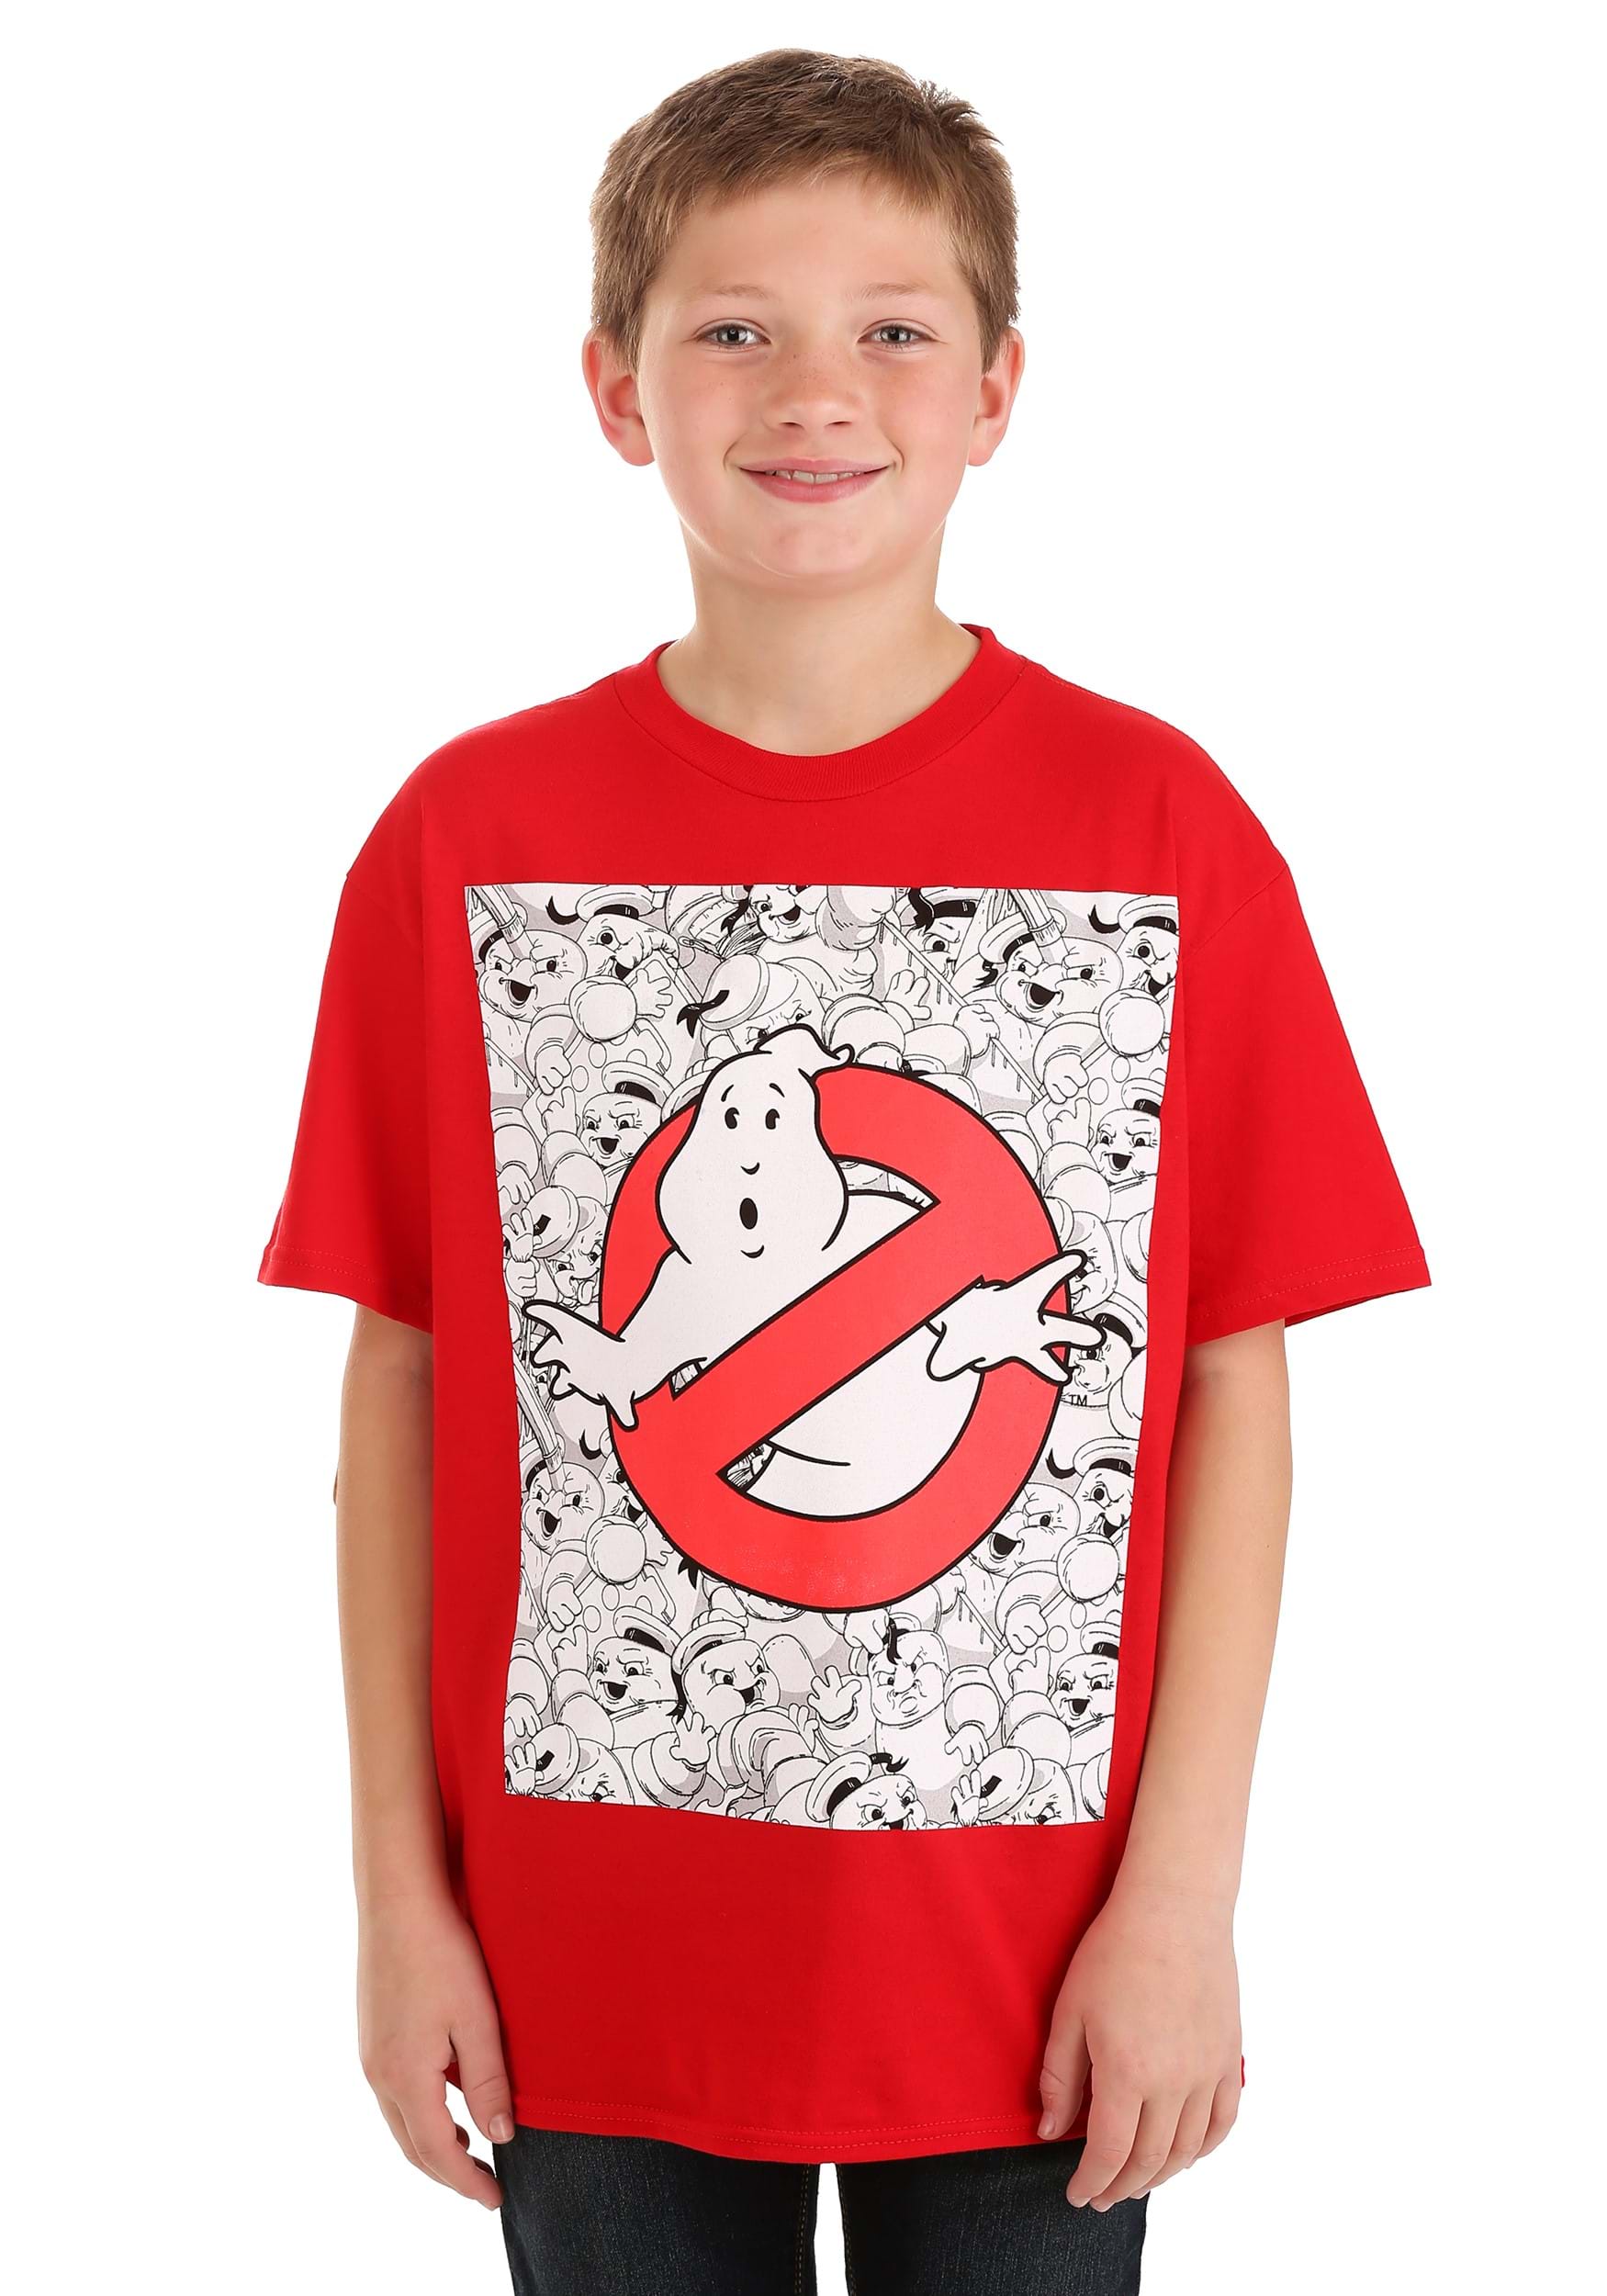 Real Ghostbusters Symbol Black Children's T-Shirt 